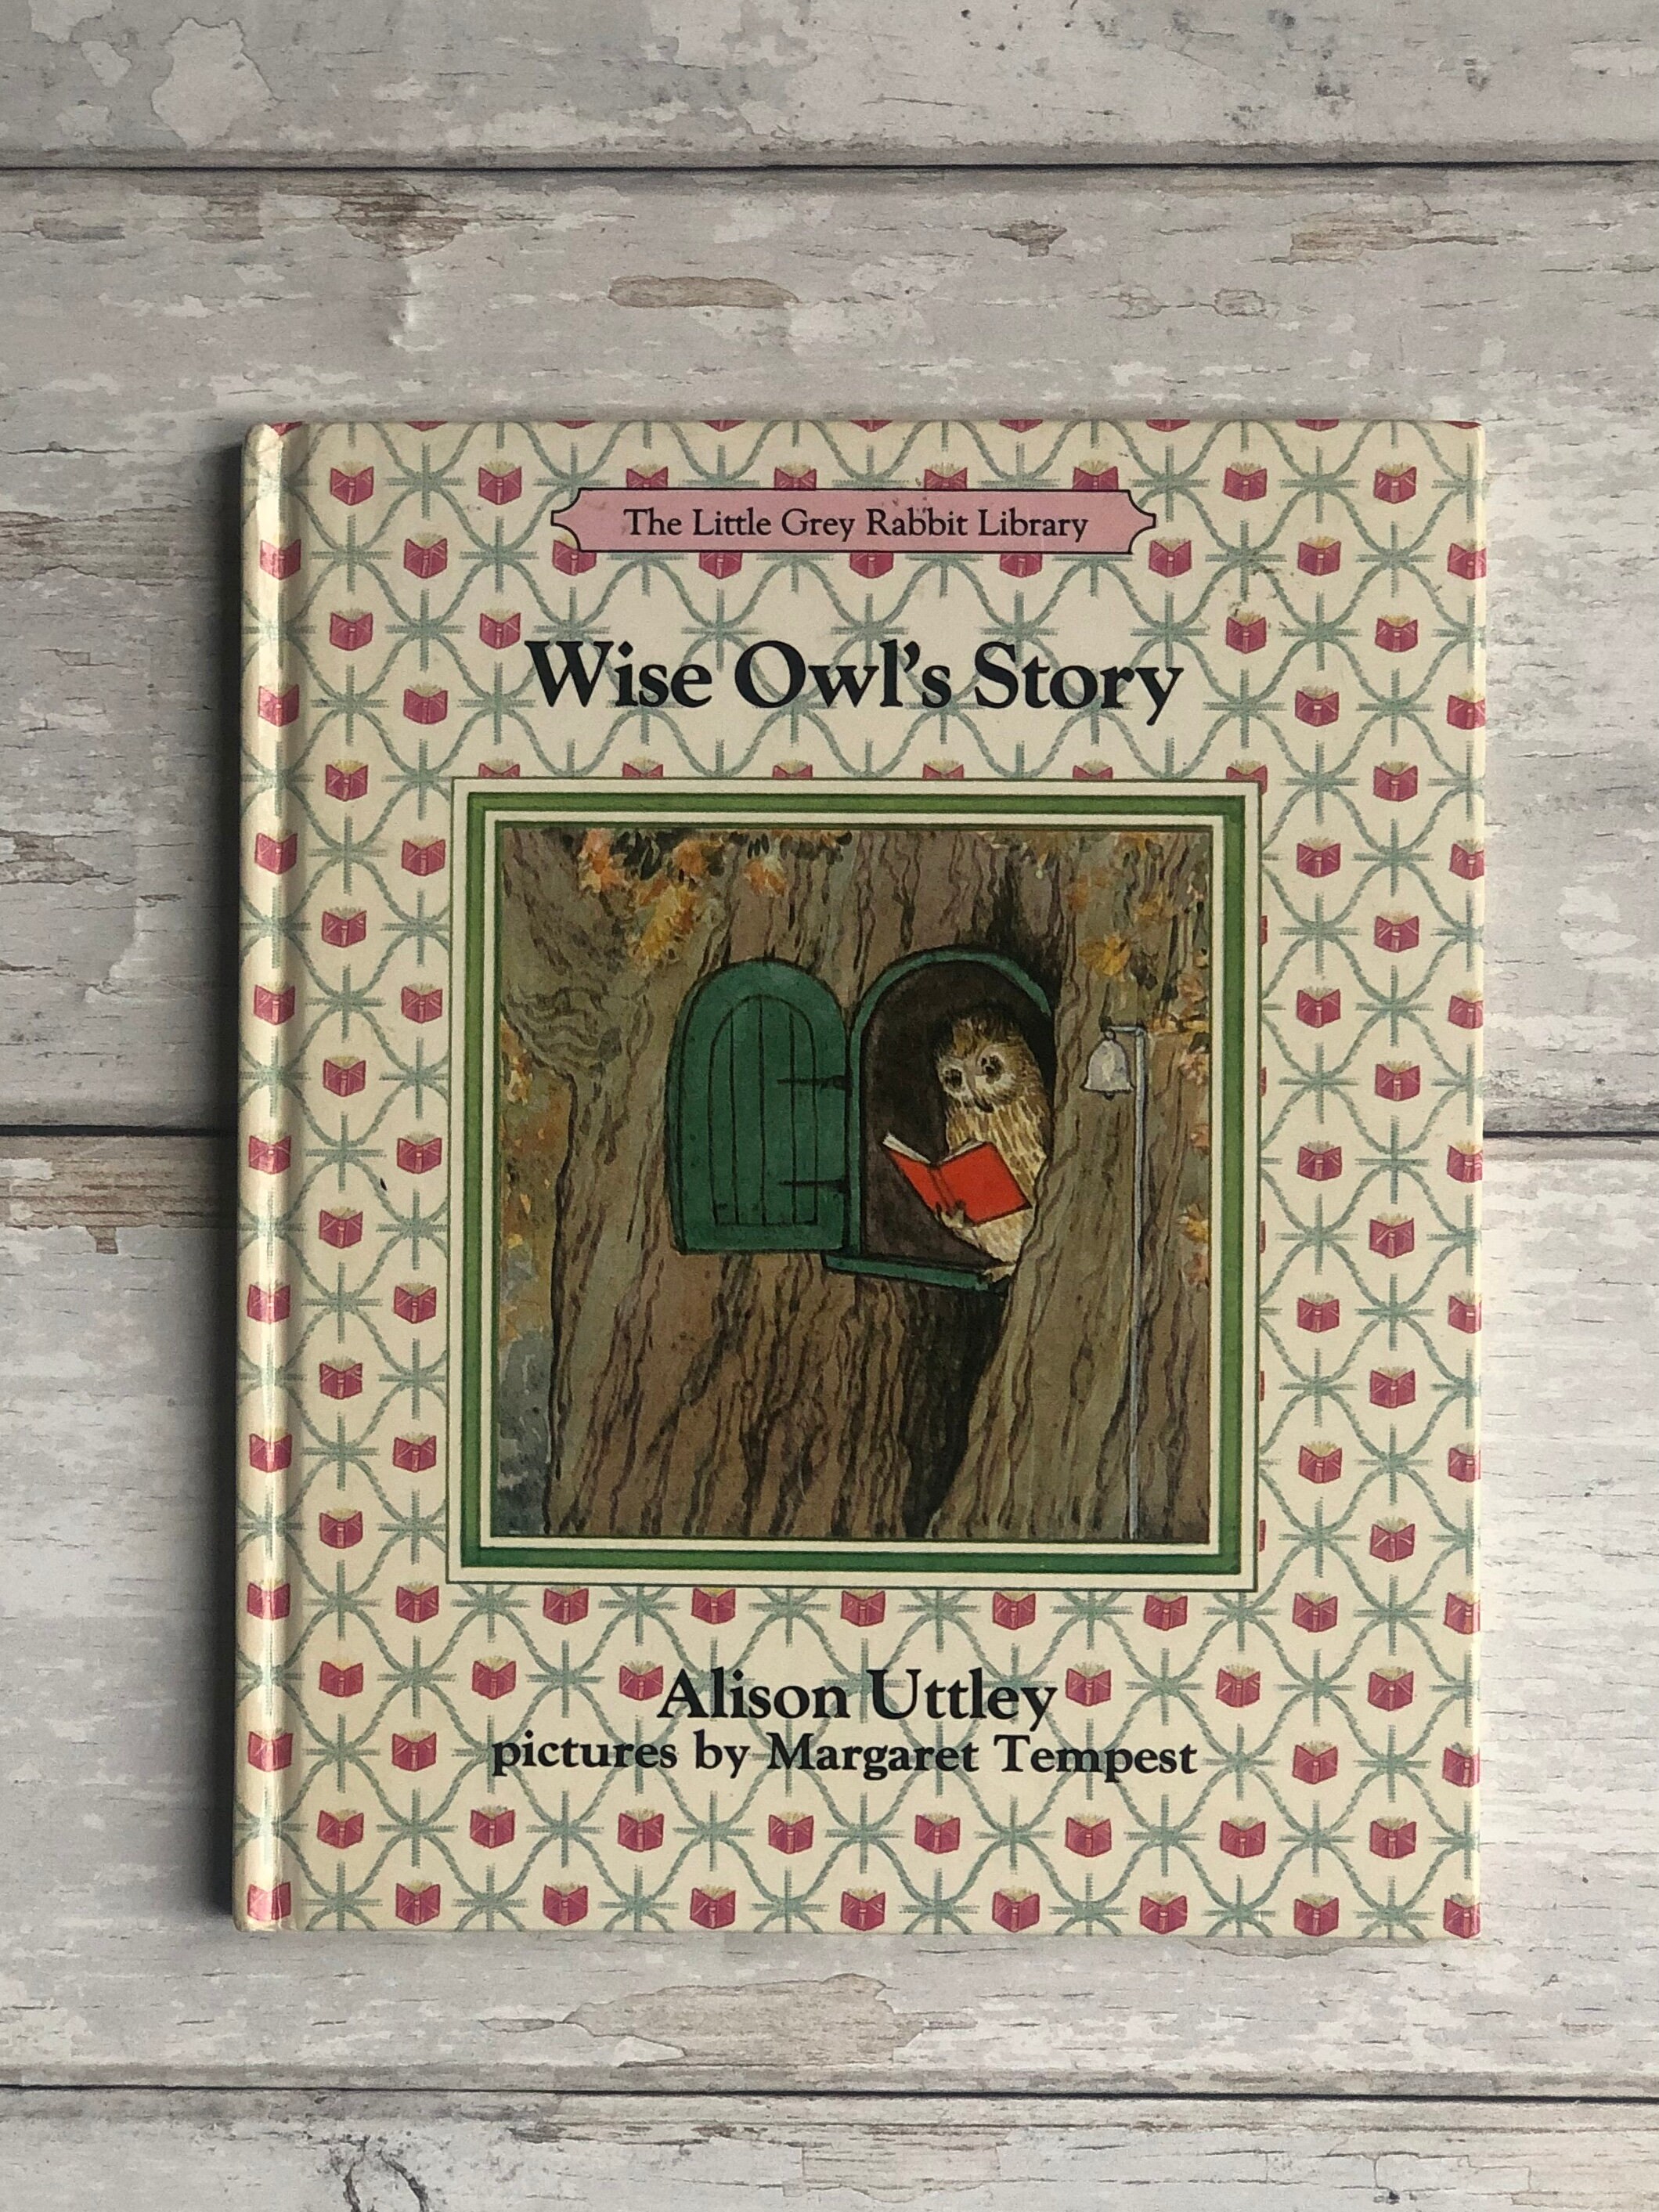 Wise Owls Story Alison Uttley Margaret Tempest The Little Grey Rabbit Library